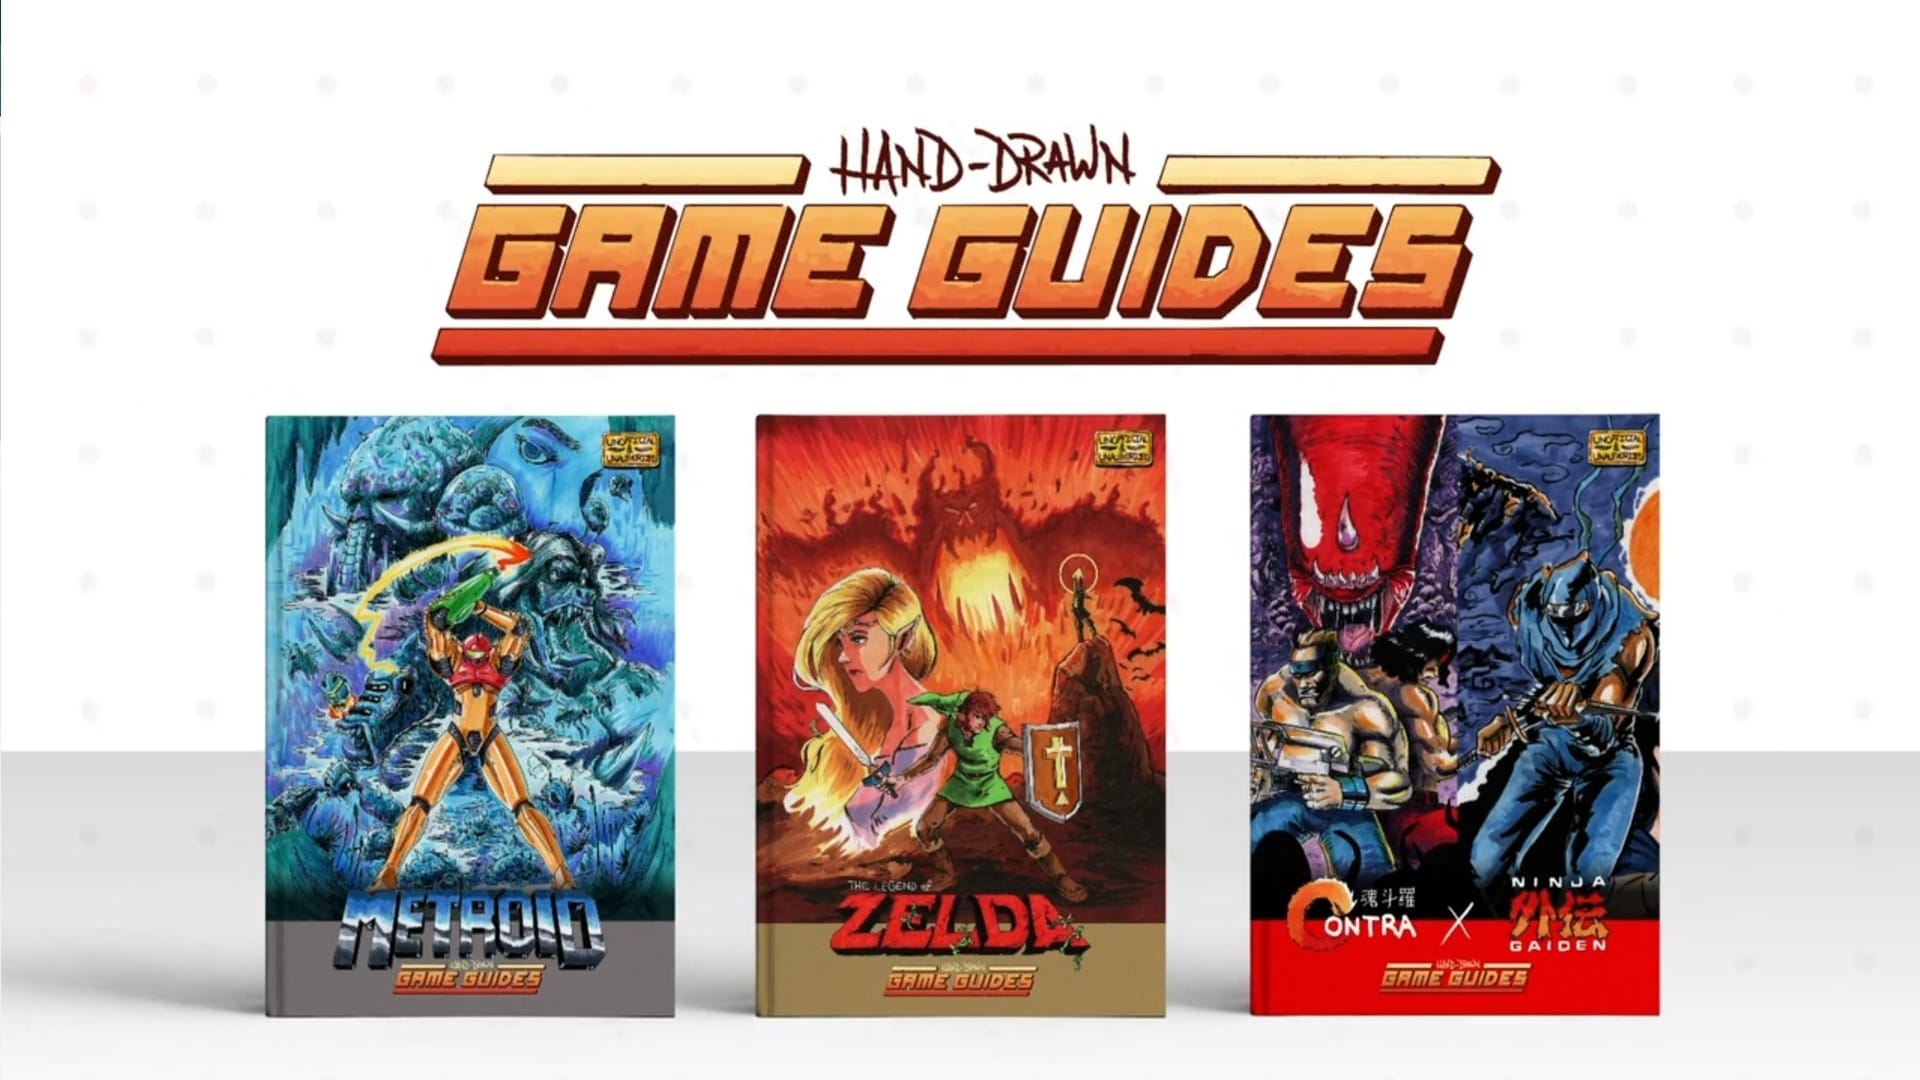 Hand-Drawn Game Guides